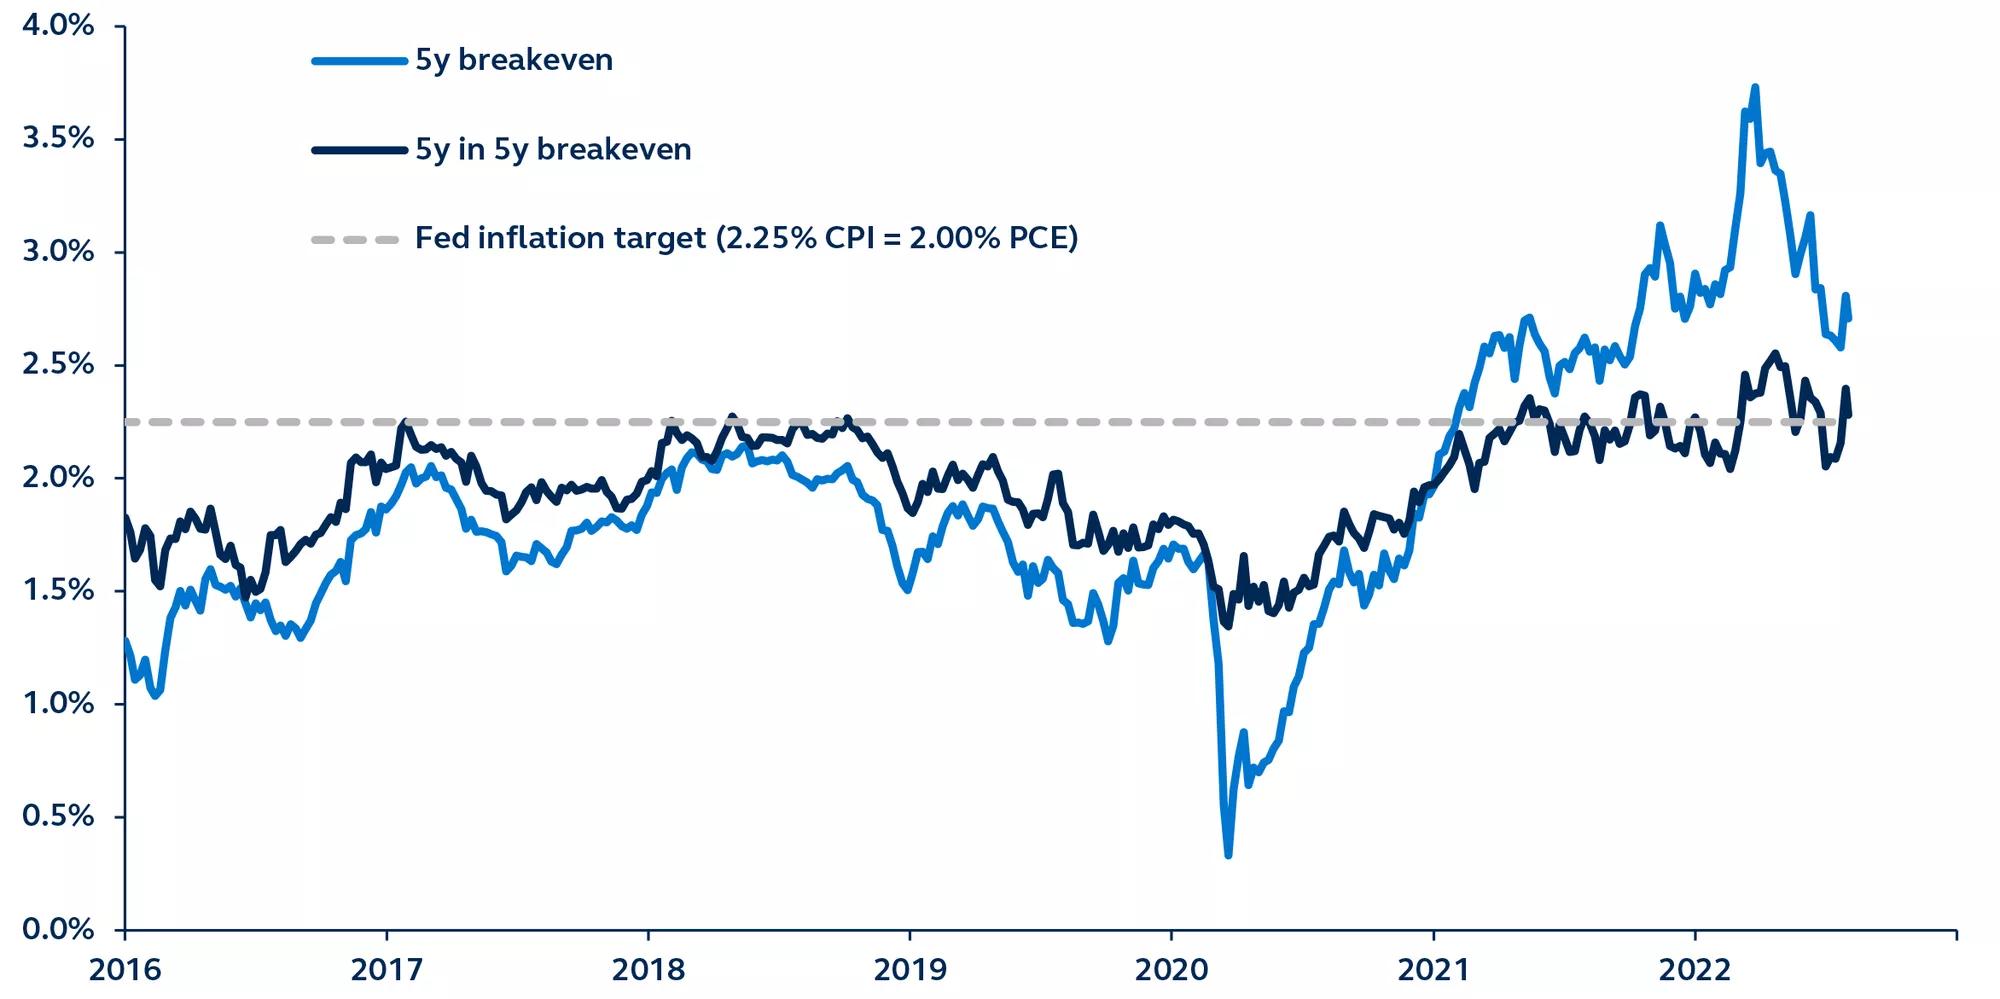 Line graph showing U.S. breakeven inflation rate from 2016 to 2022